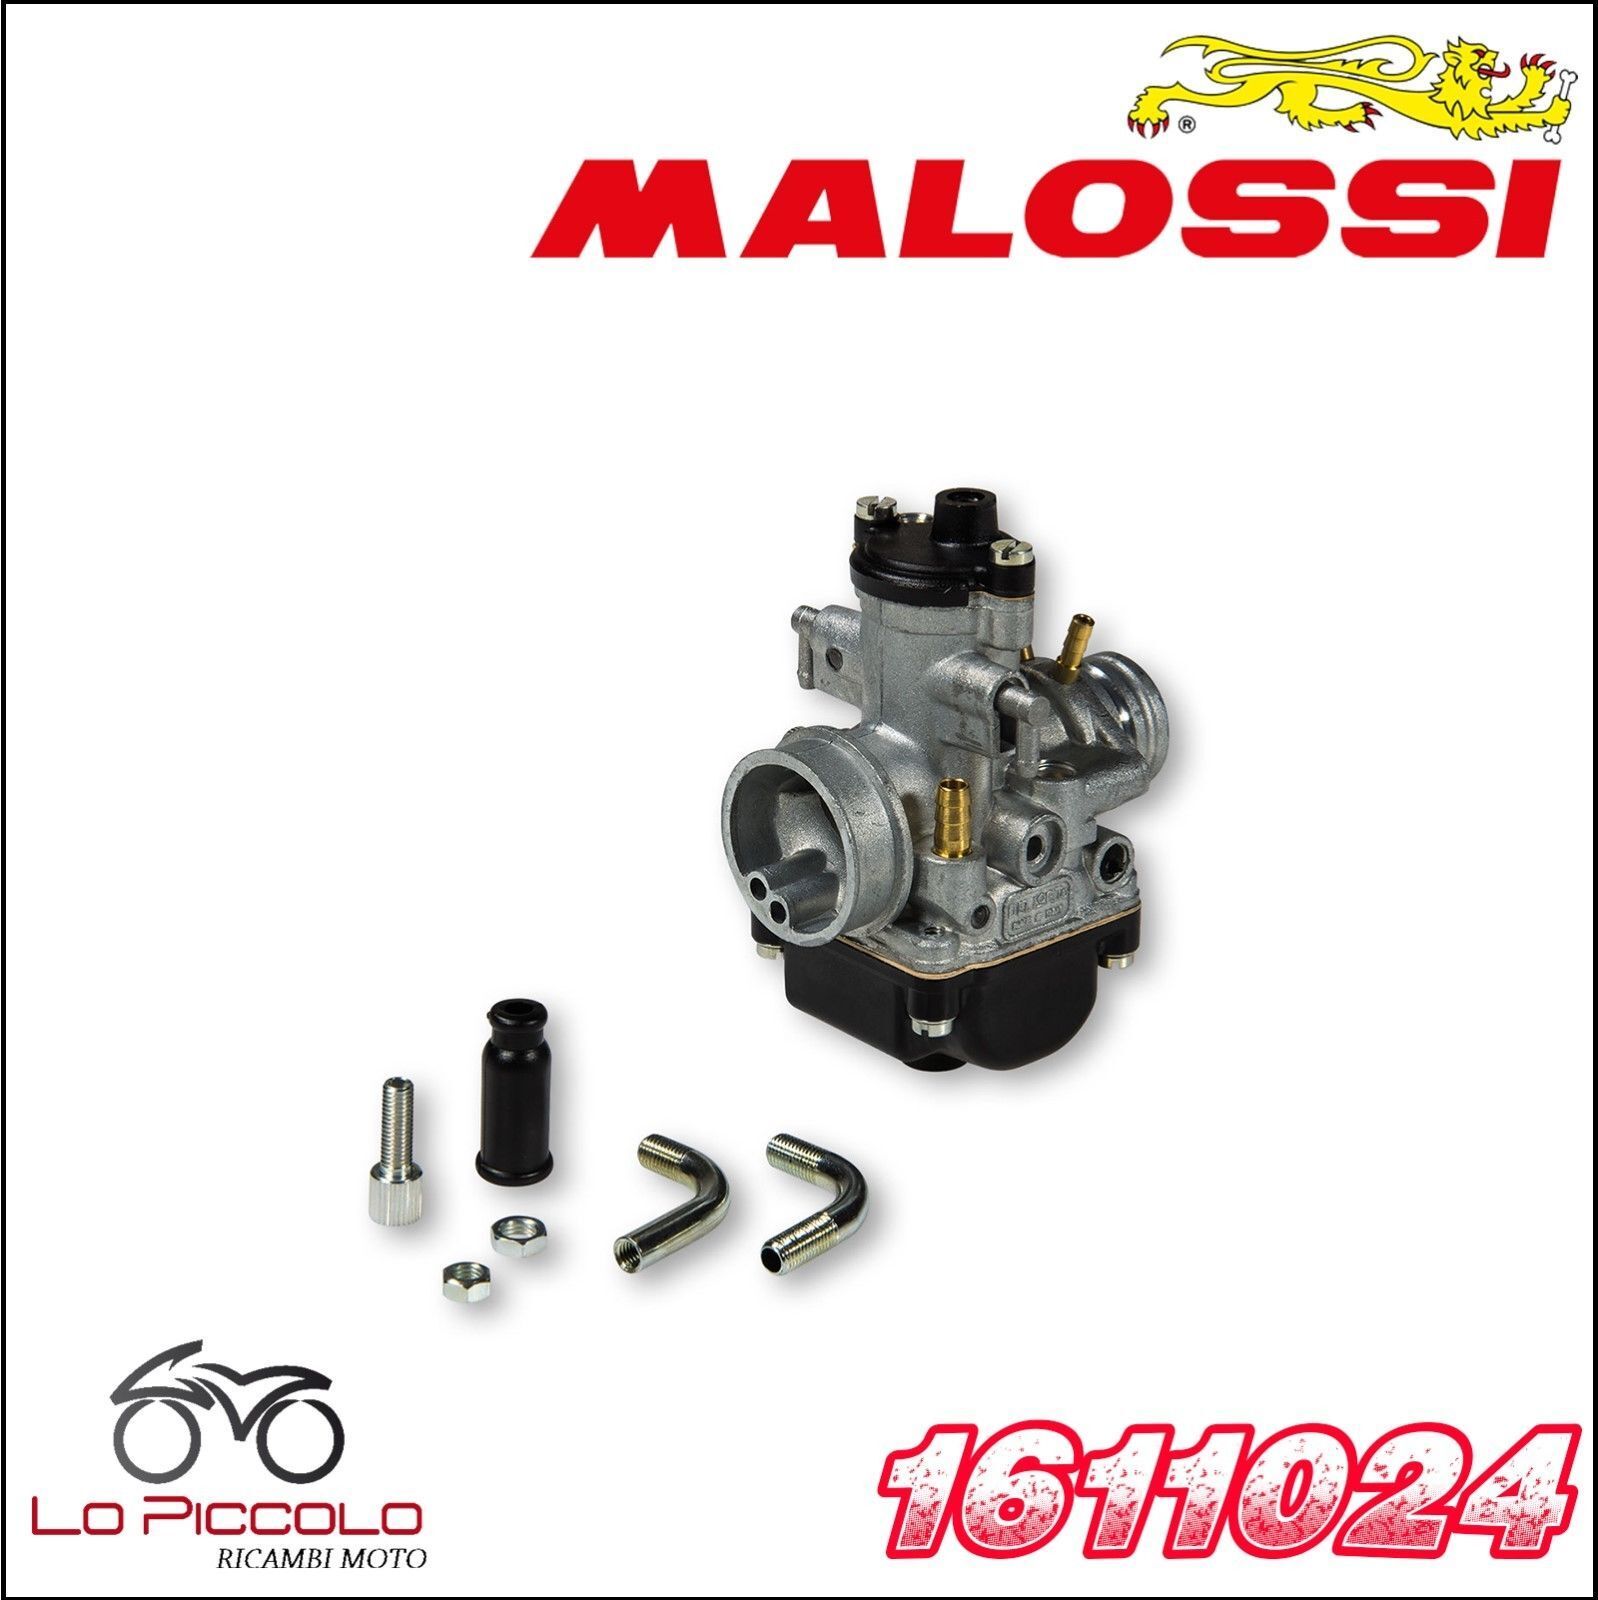 1611024 Carburettor Complete Al sold out. MALOSSI Phbg 19 Booster BS Max 59% OFF MBK 2 50